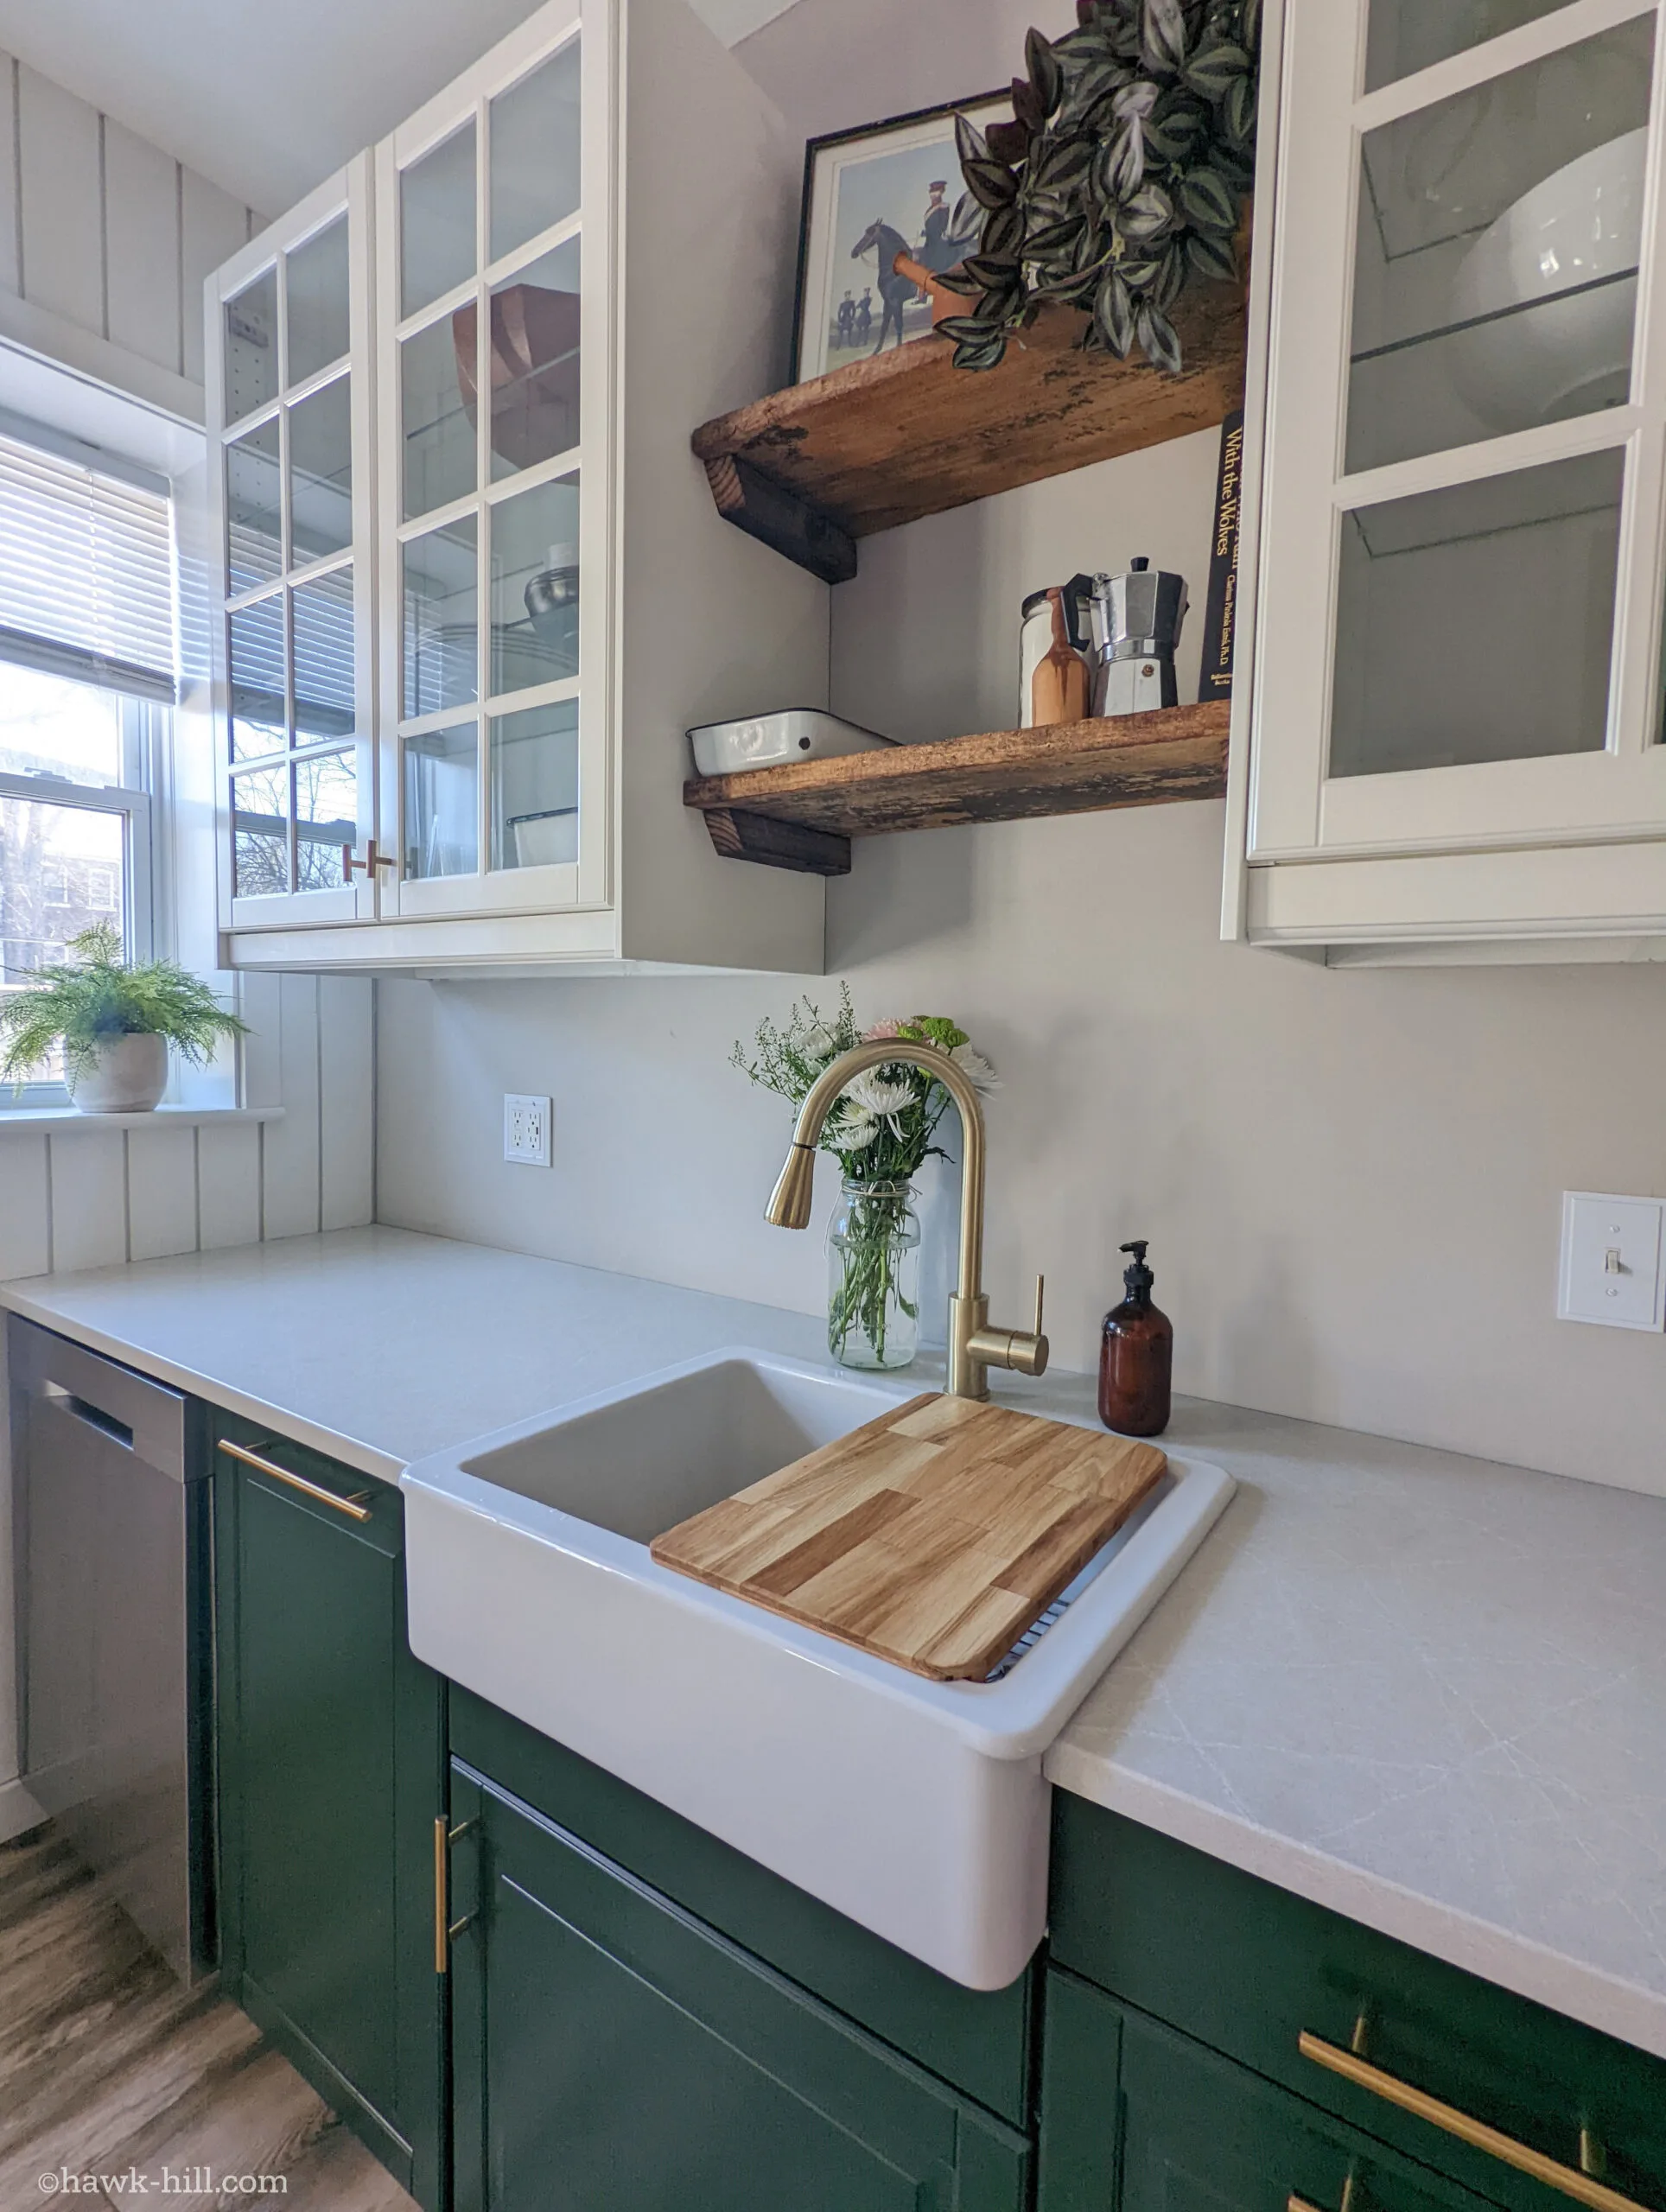 This IKEA kitchen features green cabinets, glass front white upper cabinets, and rustic open shelving created from reclaimed hundred-year-old wood planks.